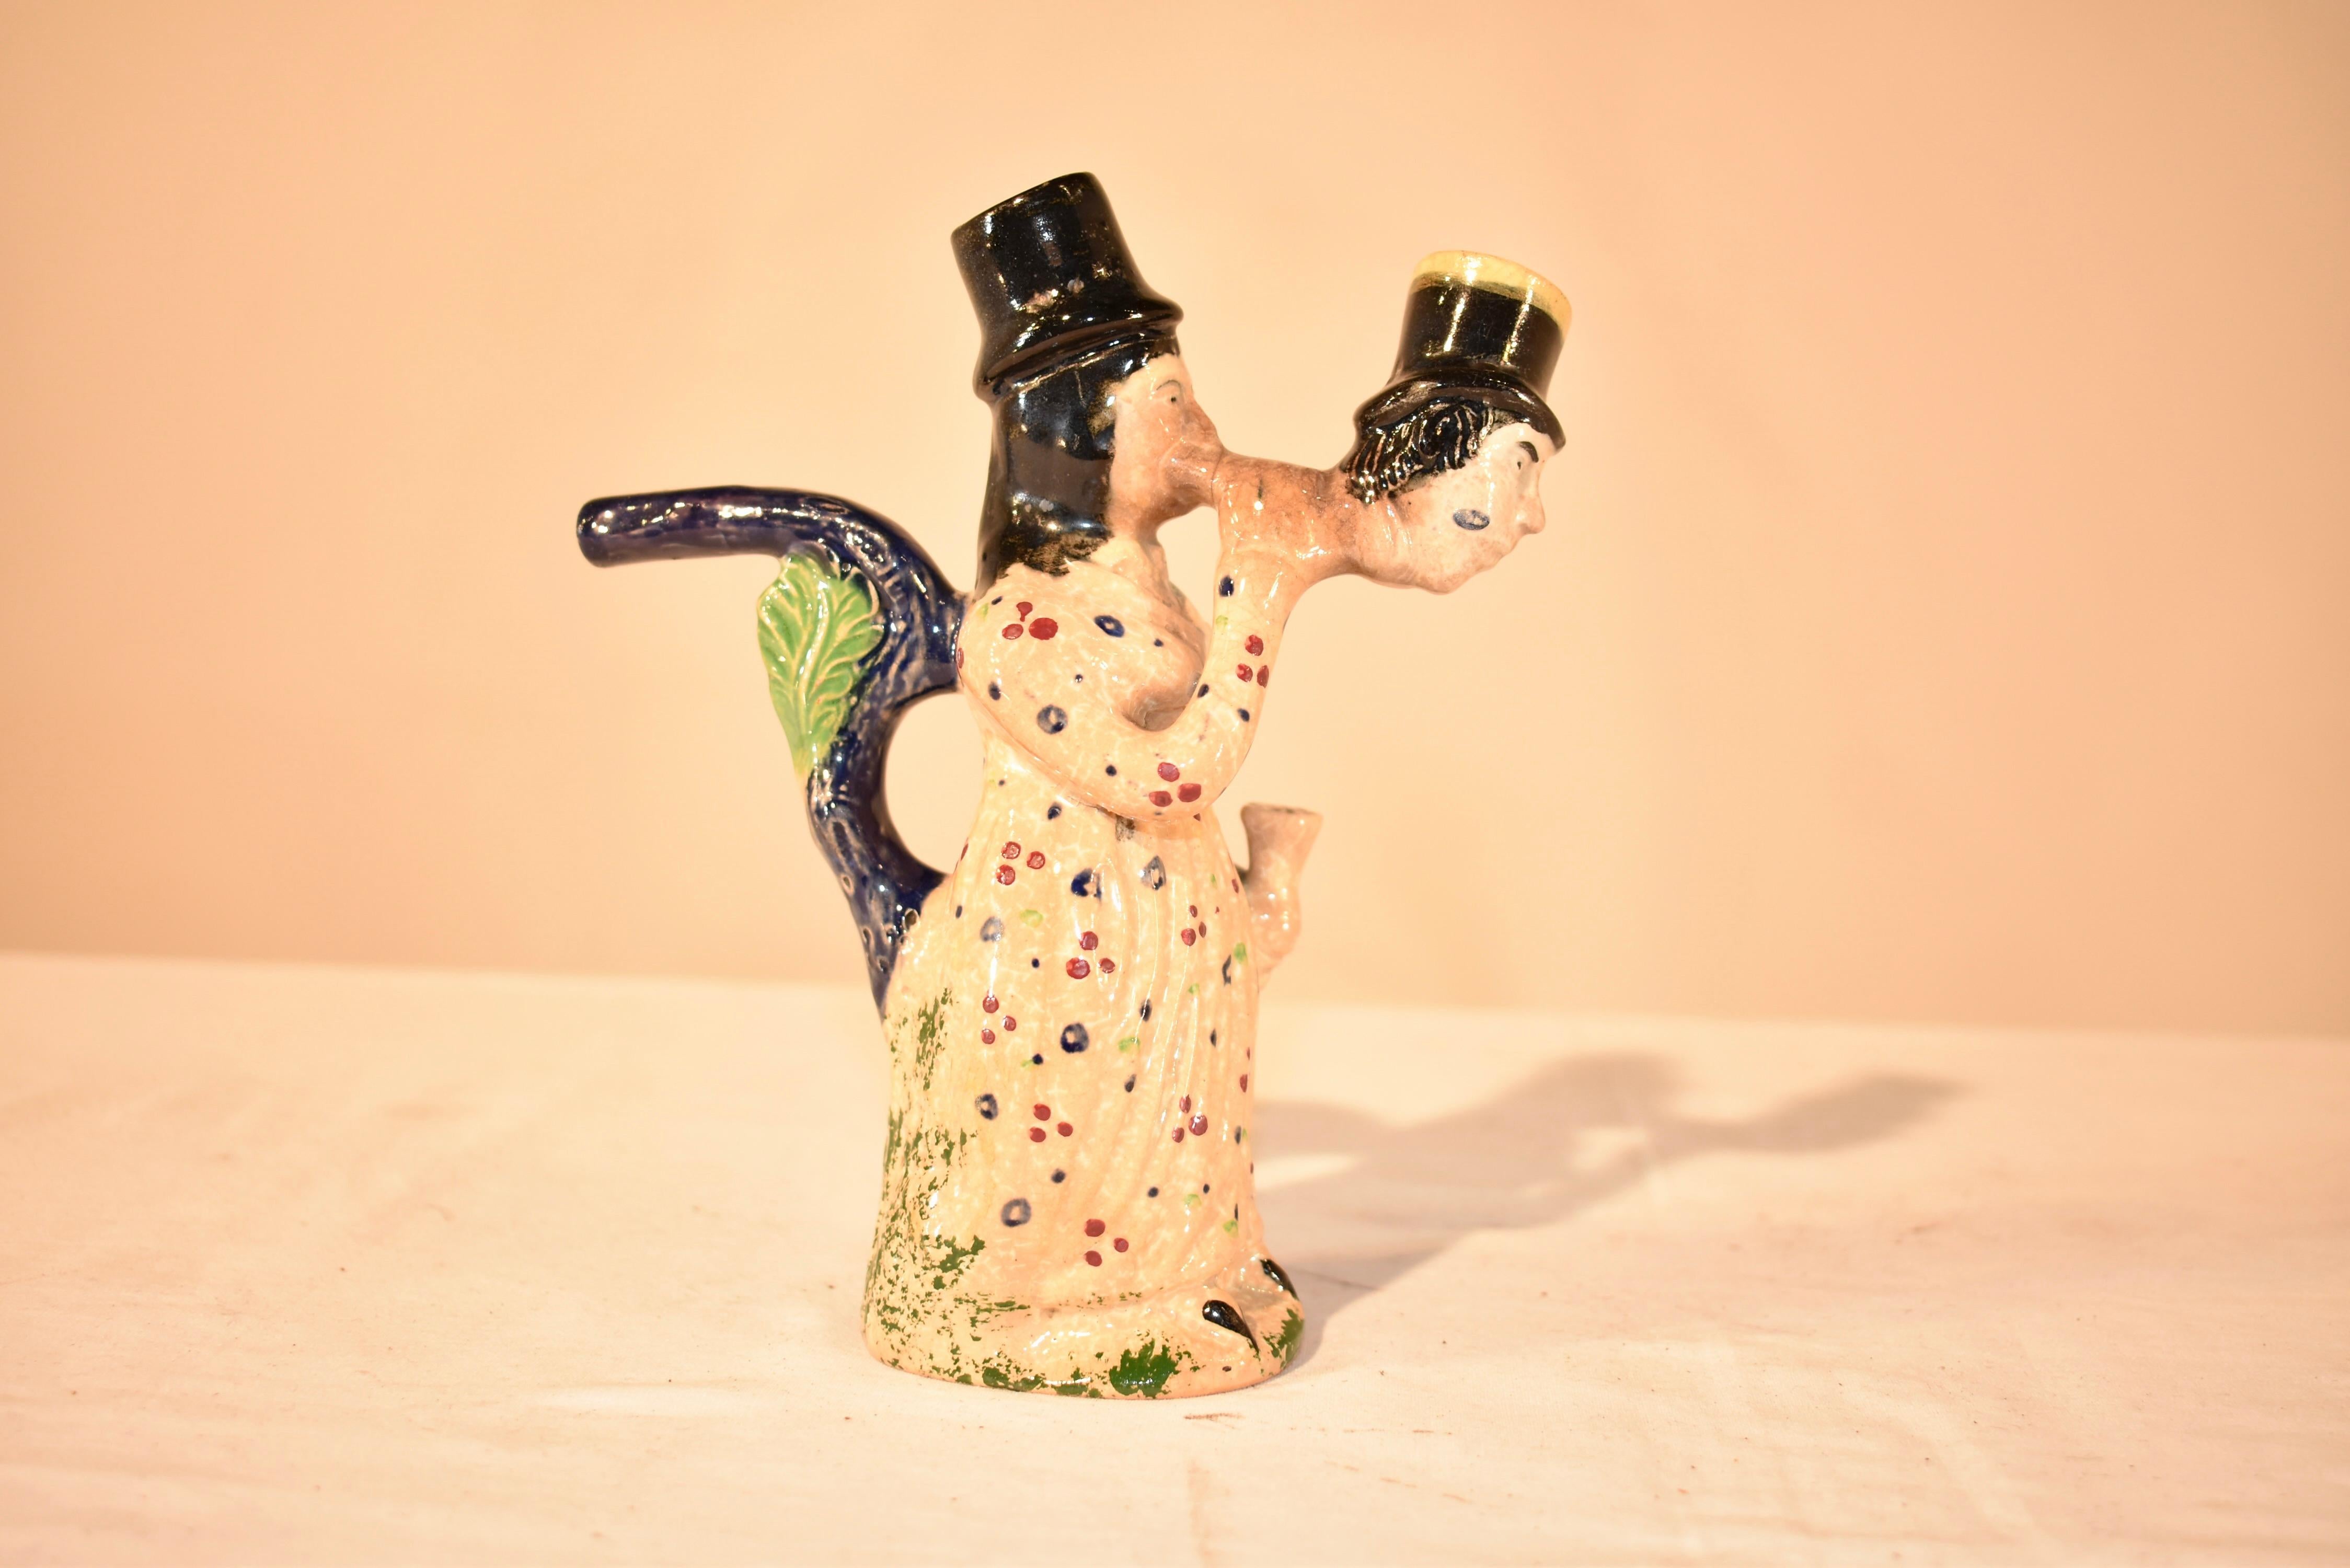 Early 19th century  Prattware pipe made in the Staffordshire region of England.  This figural pipe is unusual and has a woman smoking through the head of a man.  She is dressed in a floral patterned dress, and is wearing a tall hat, as is the man's